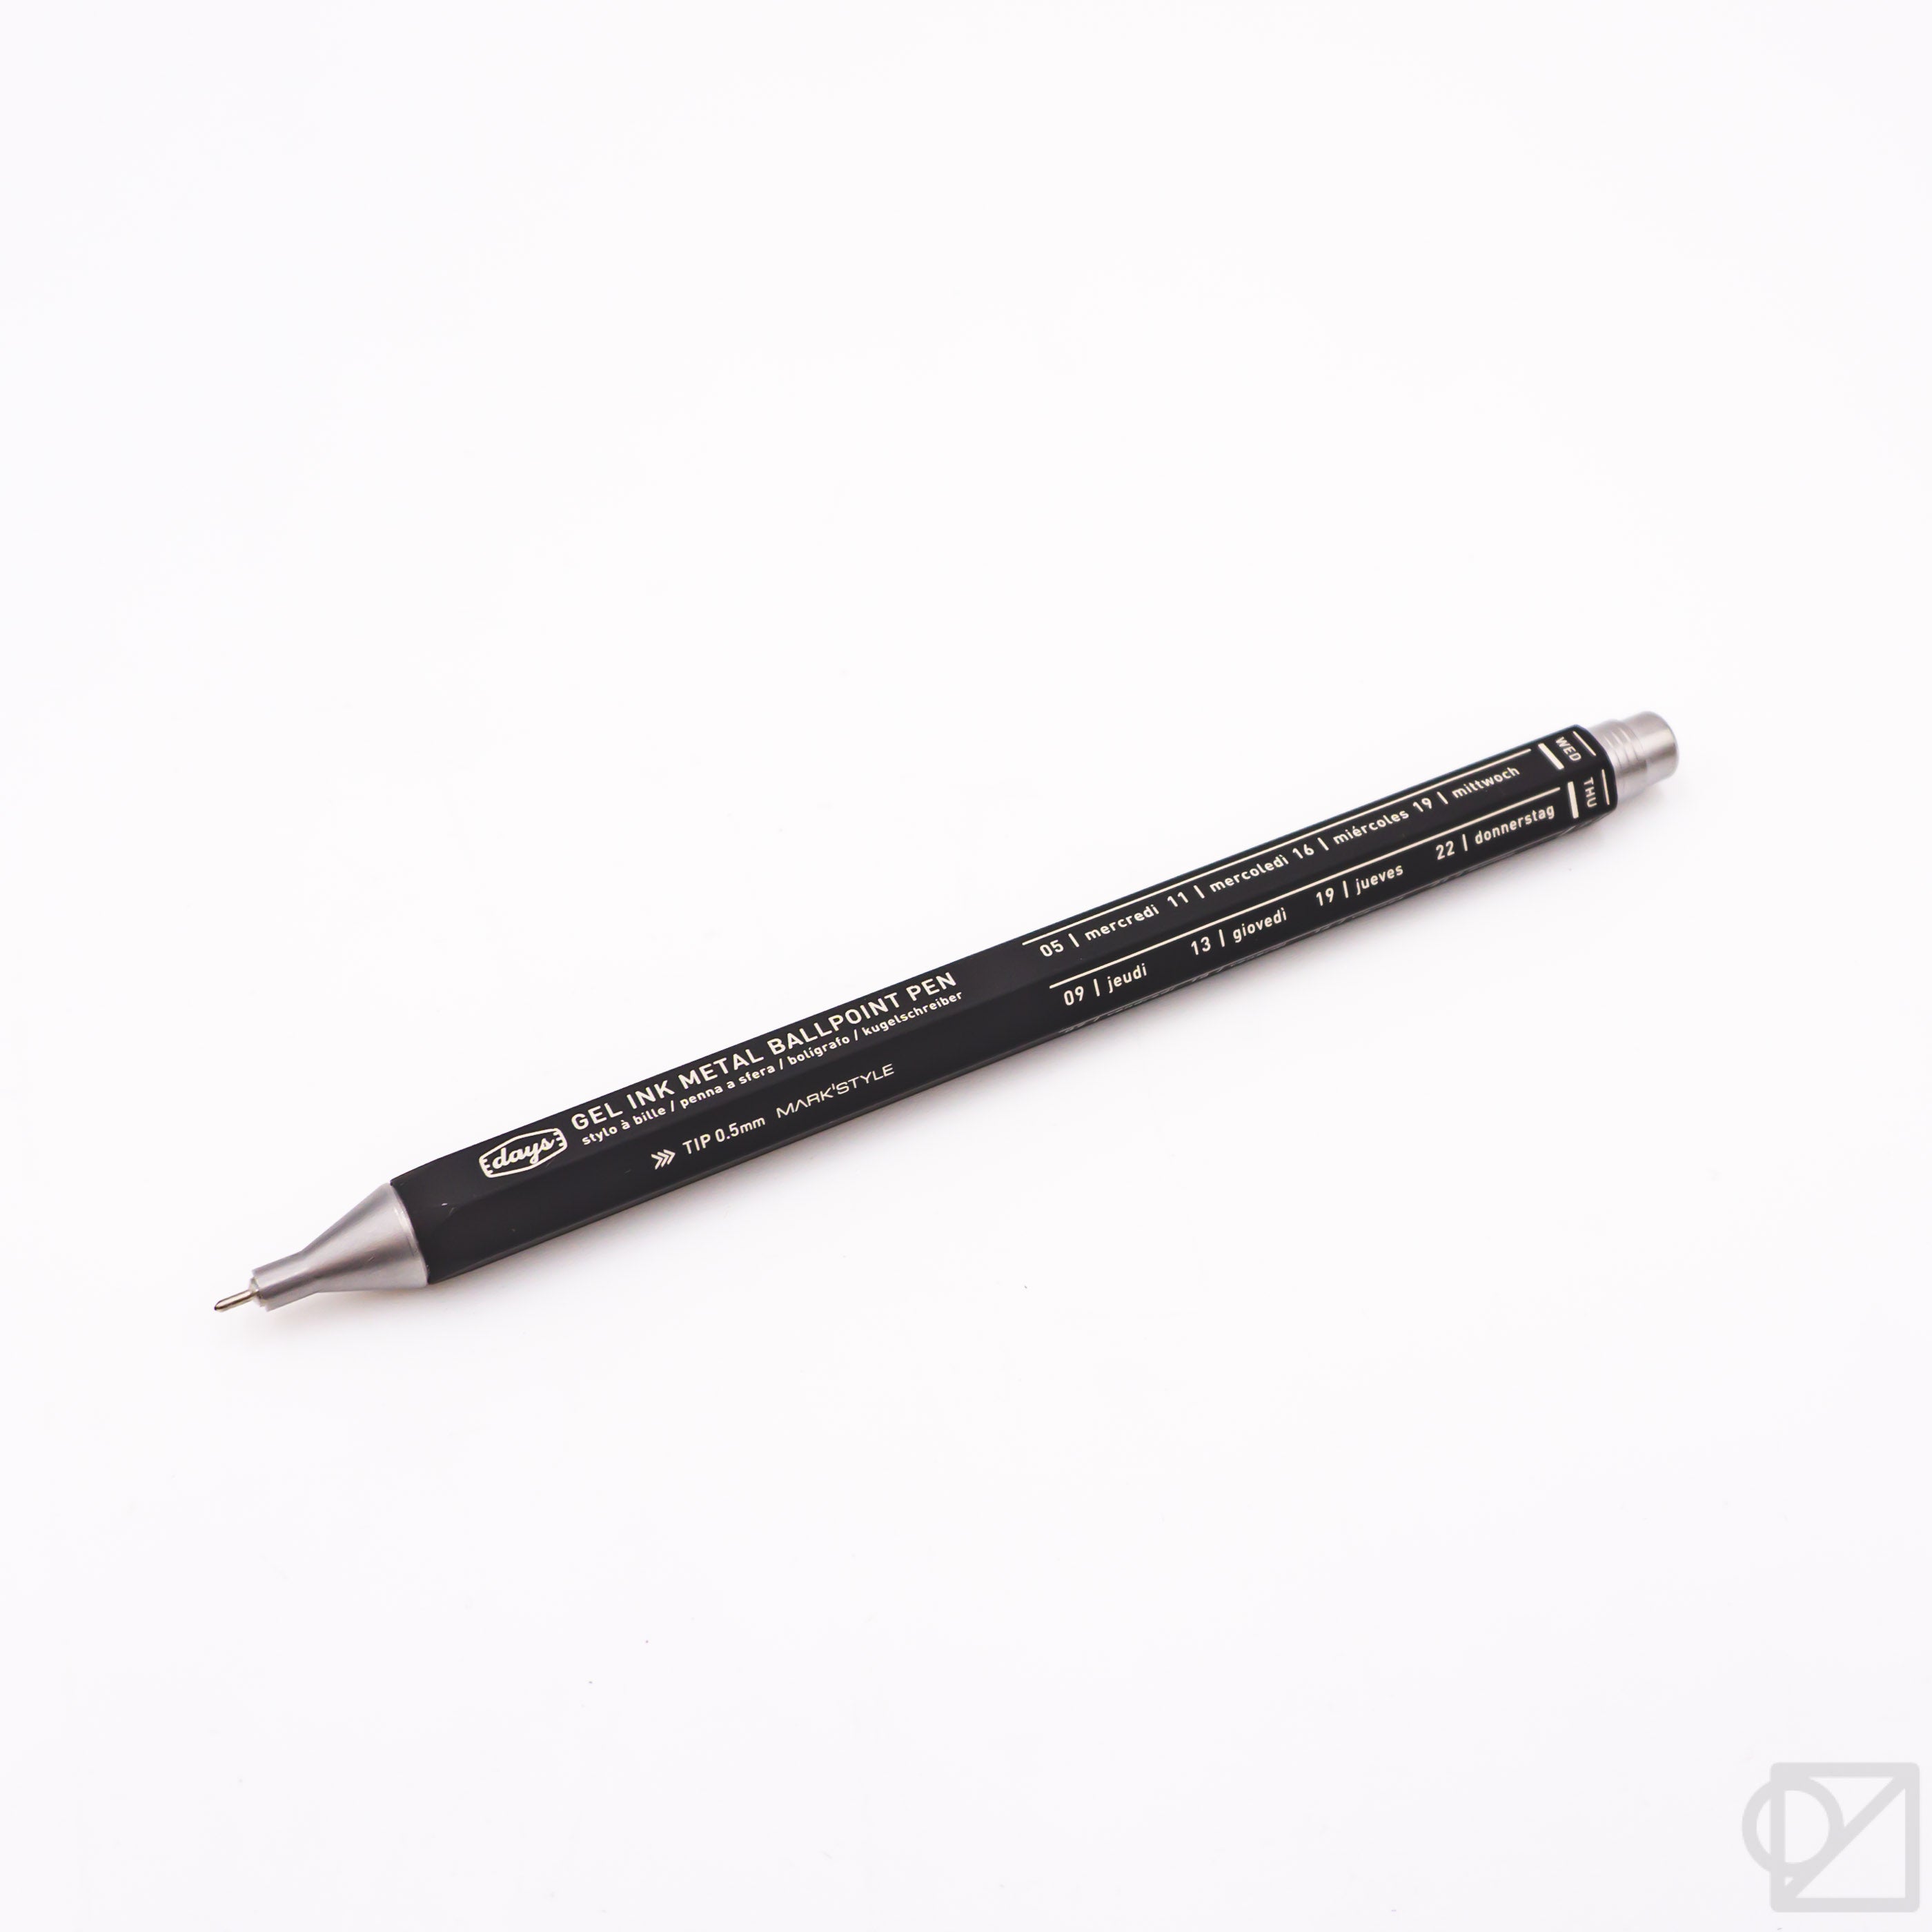 The Best Pens For Metal - Make Your Mark Correctly!